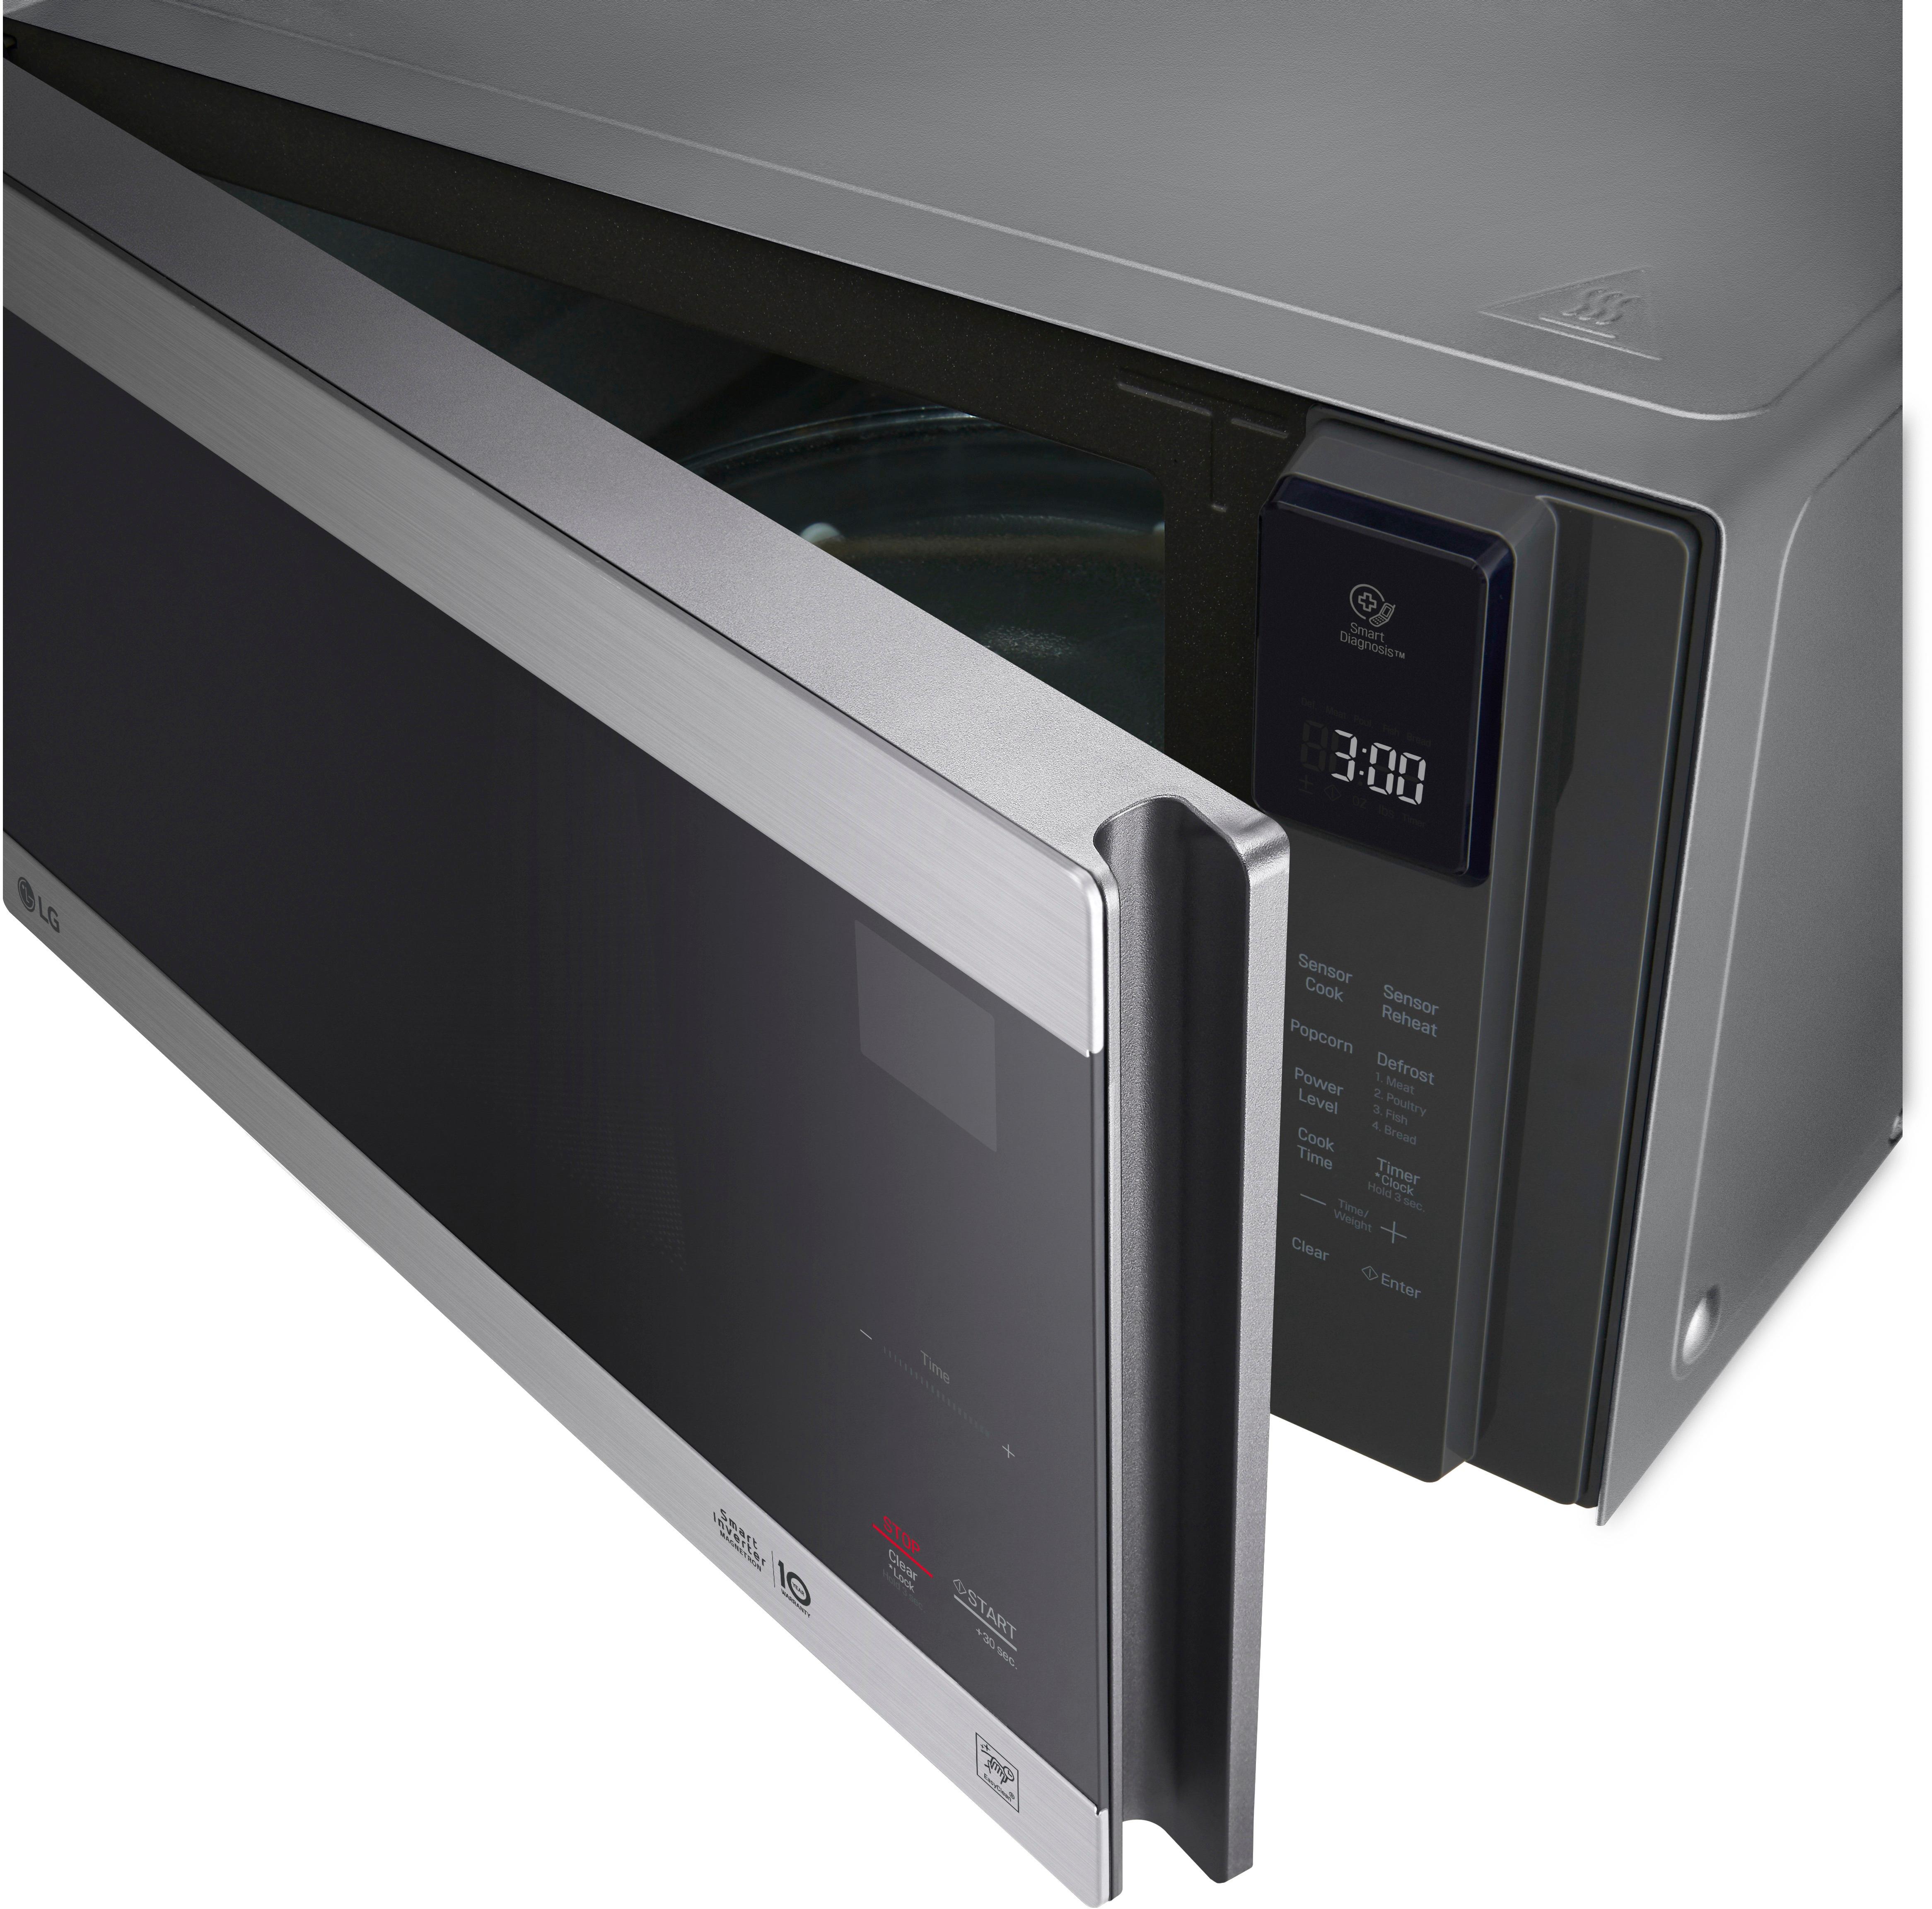 LG NeoChef 1.5 Cu. Ft. Mid-Size Microwave Stainless steel LMC1575ST